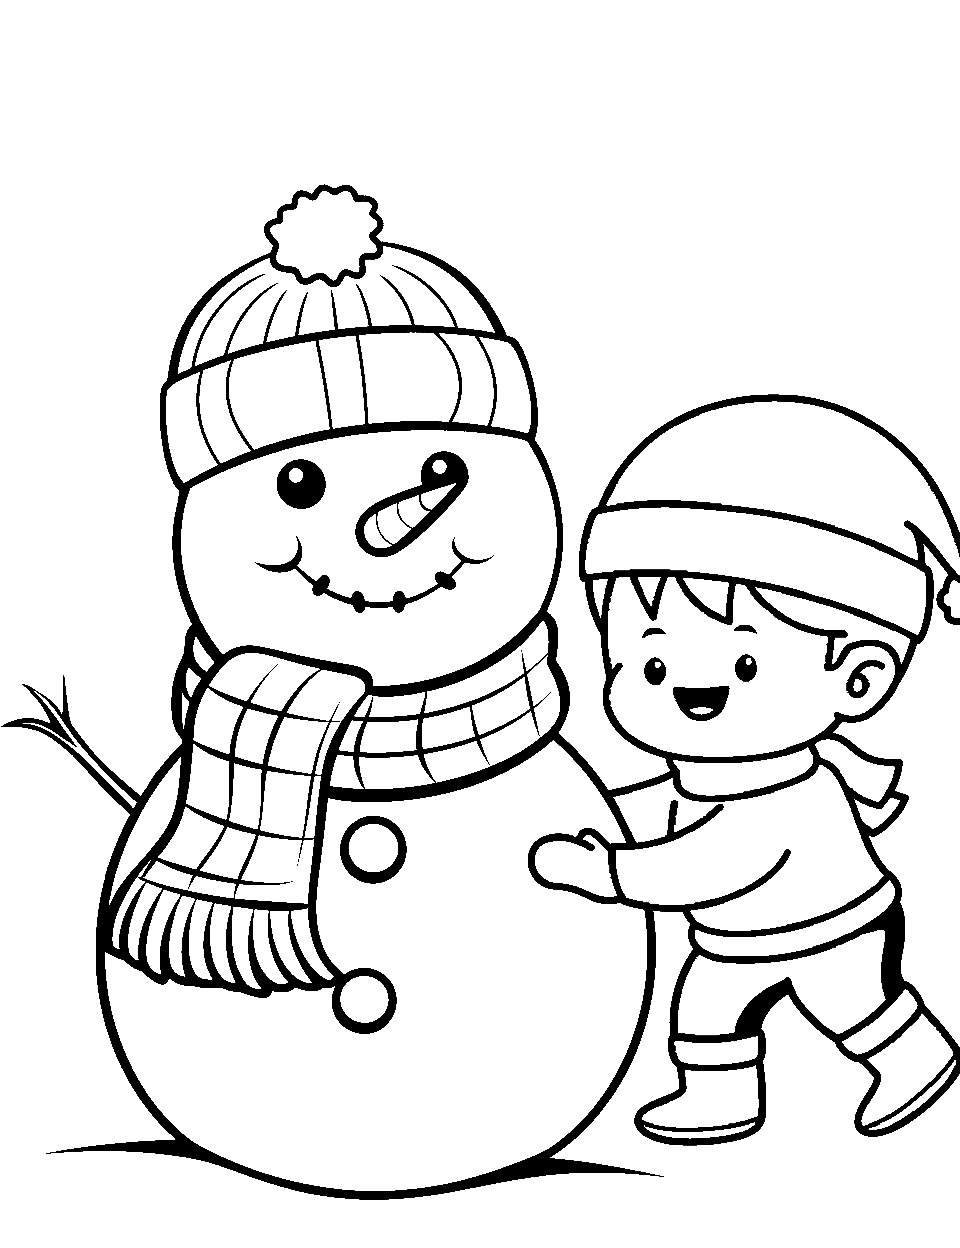 Kid Building a Snowman Coloring Page - A kid putting the finishing touches on a snowman.